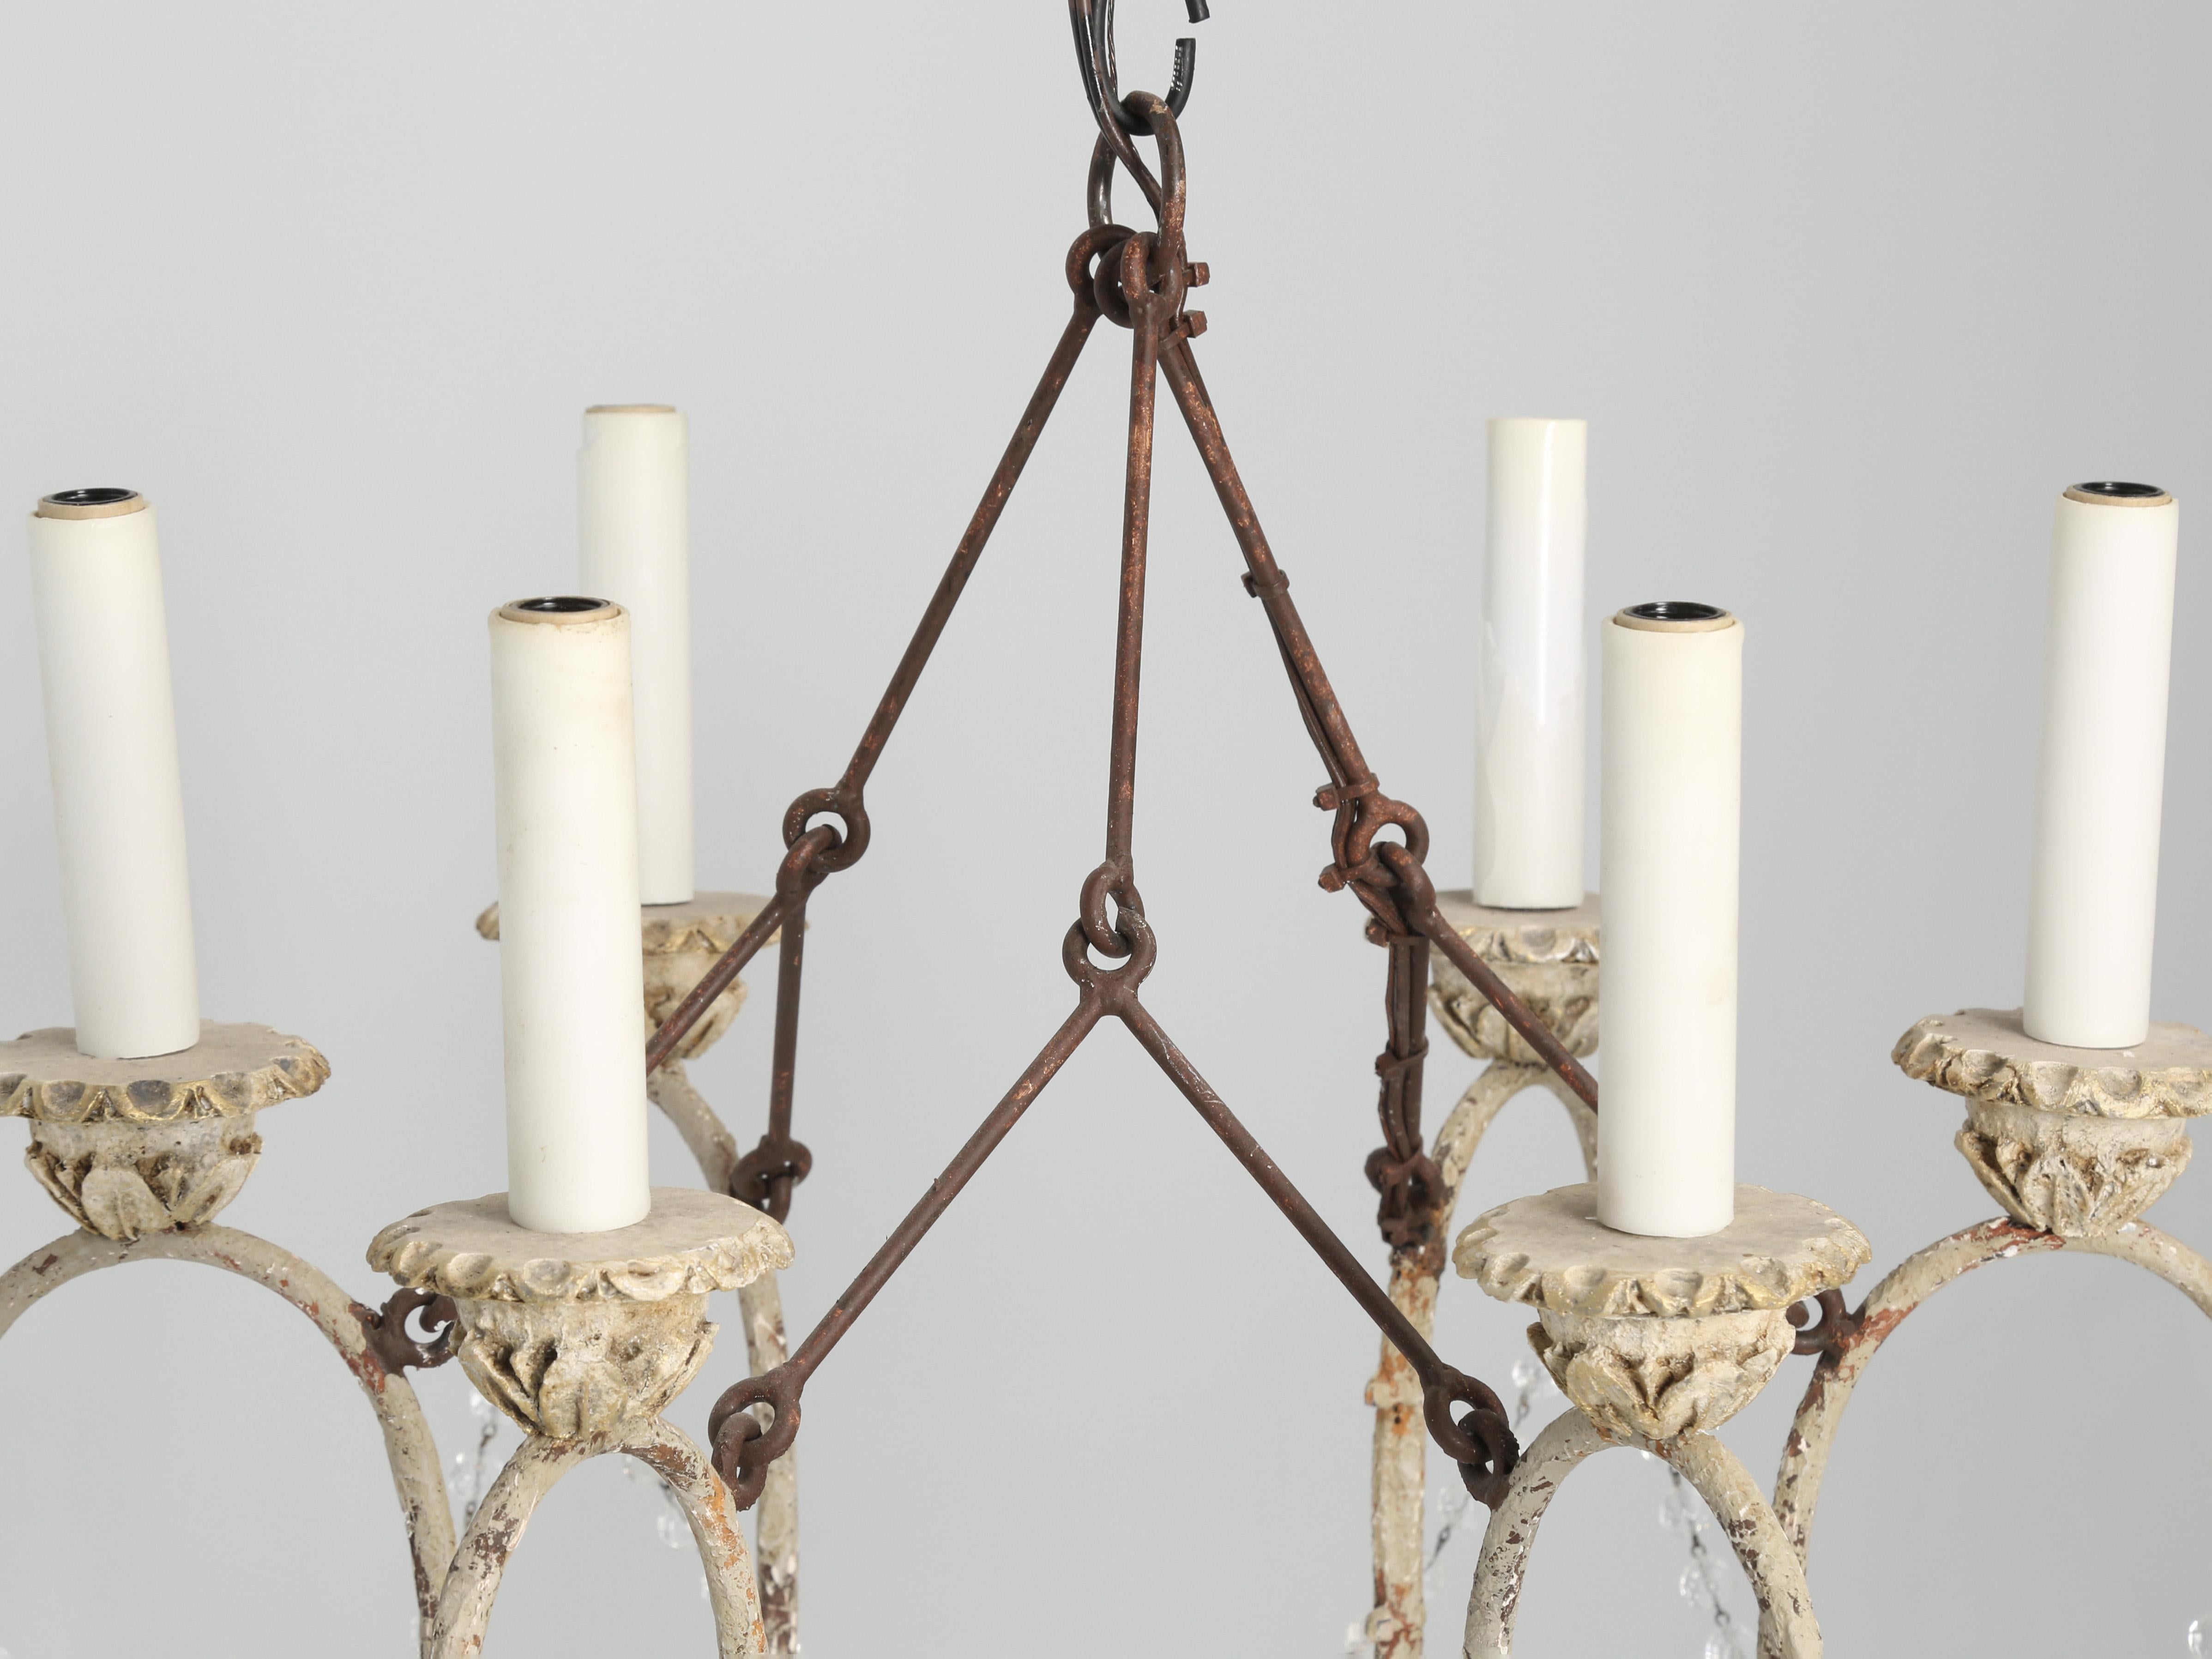 Manufactured by Niermann Weeks this Italian chandelier with 6-lights was used as a showroom sample and never sold or installed. Great looking with simple, yet elegant style and reminiscence of an antique Italian chandelier. The Niermann Weeks